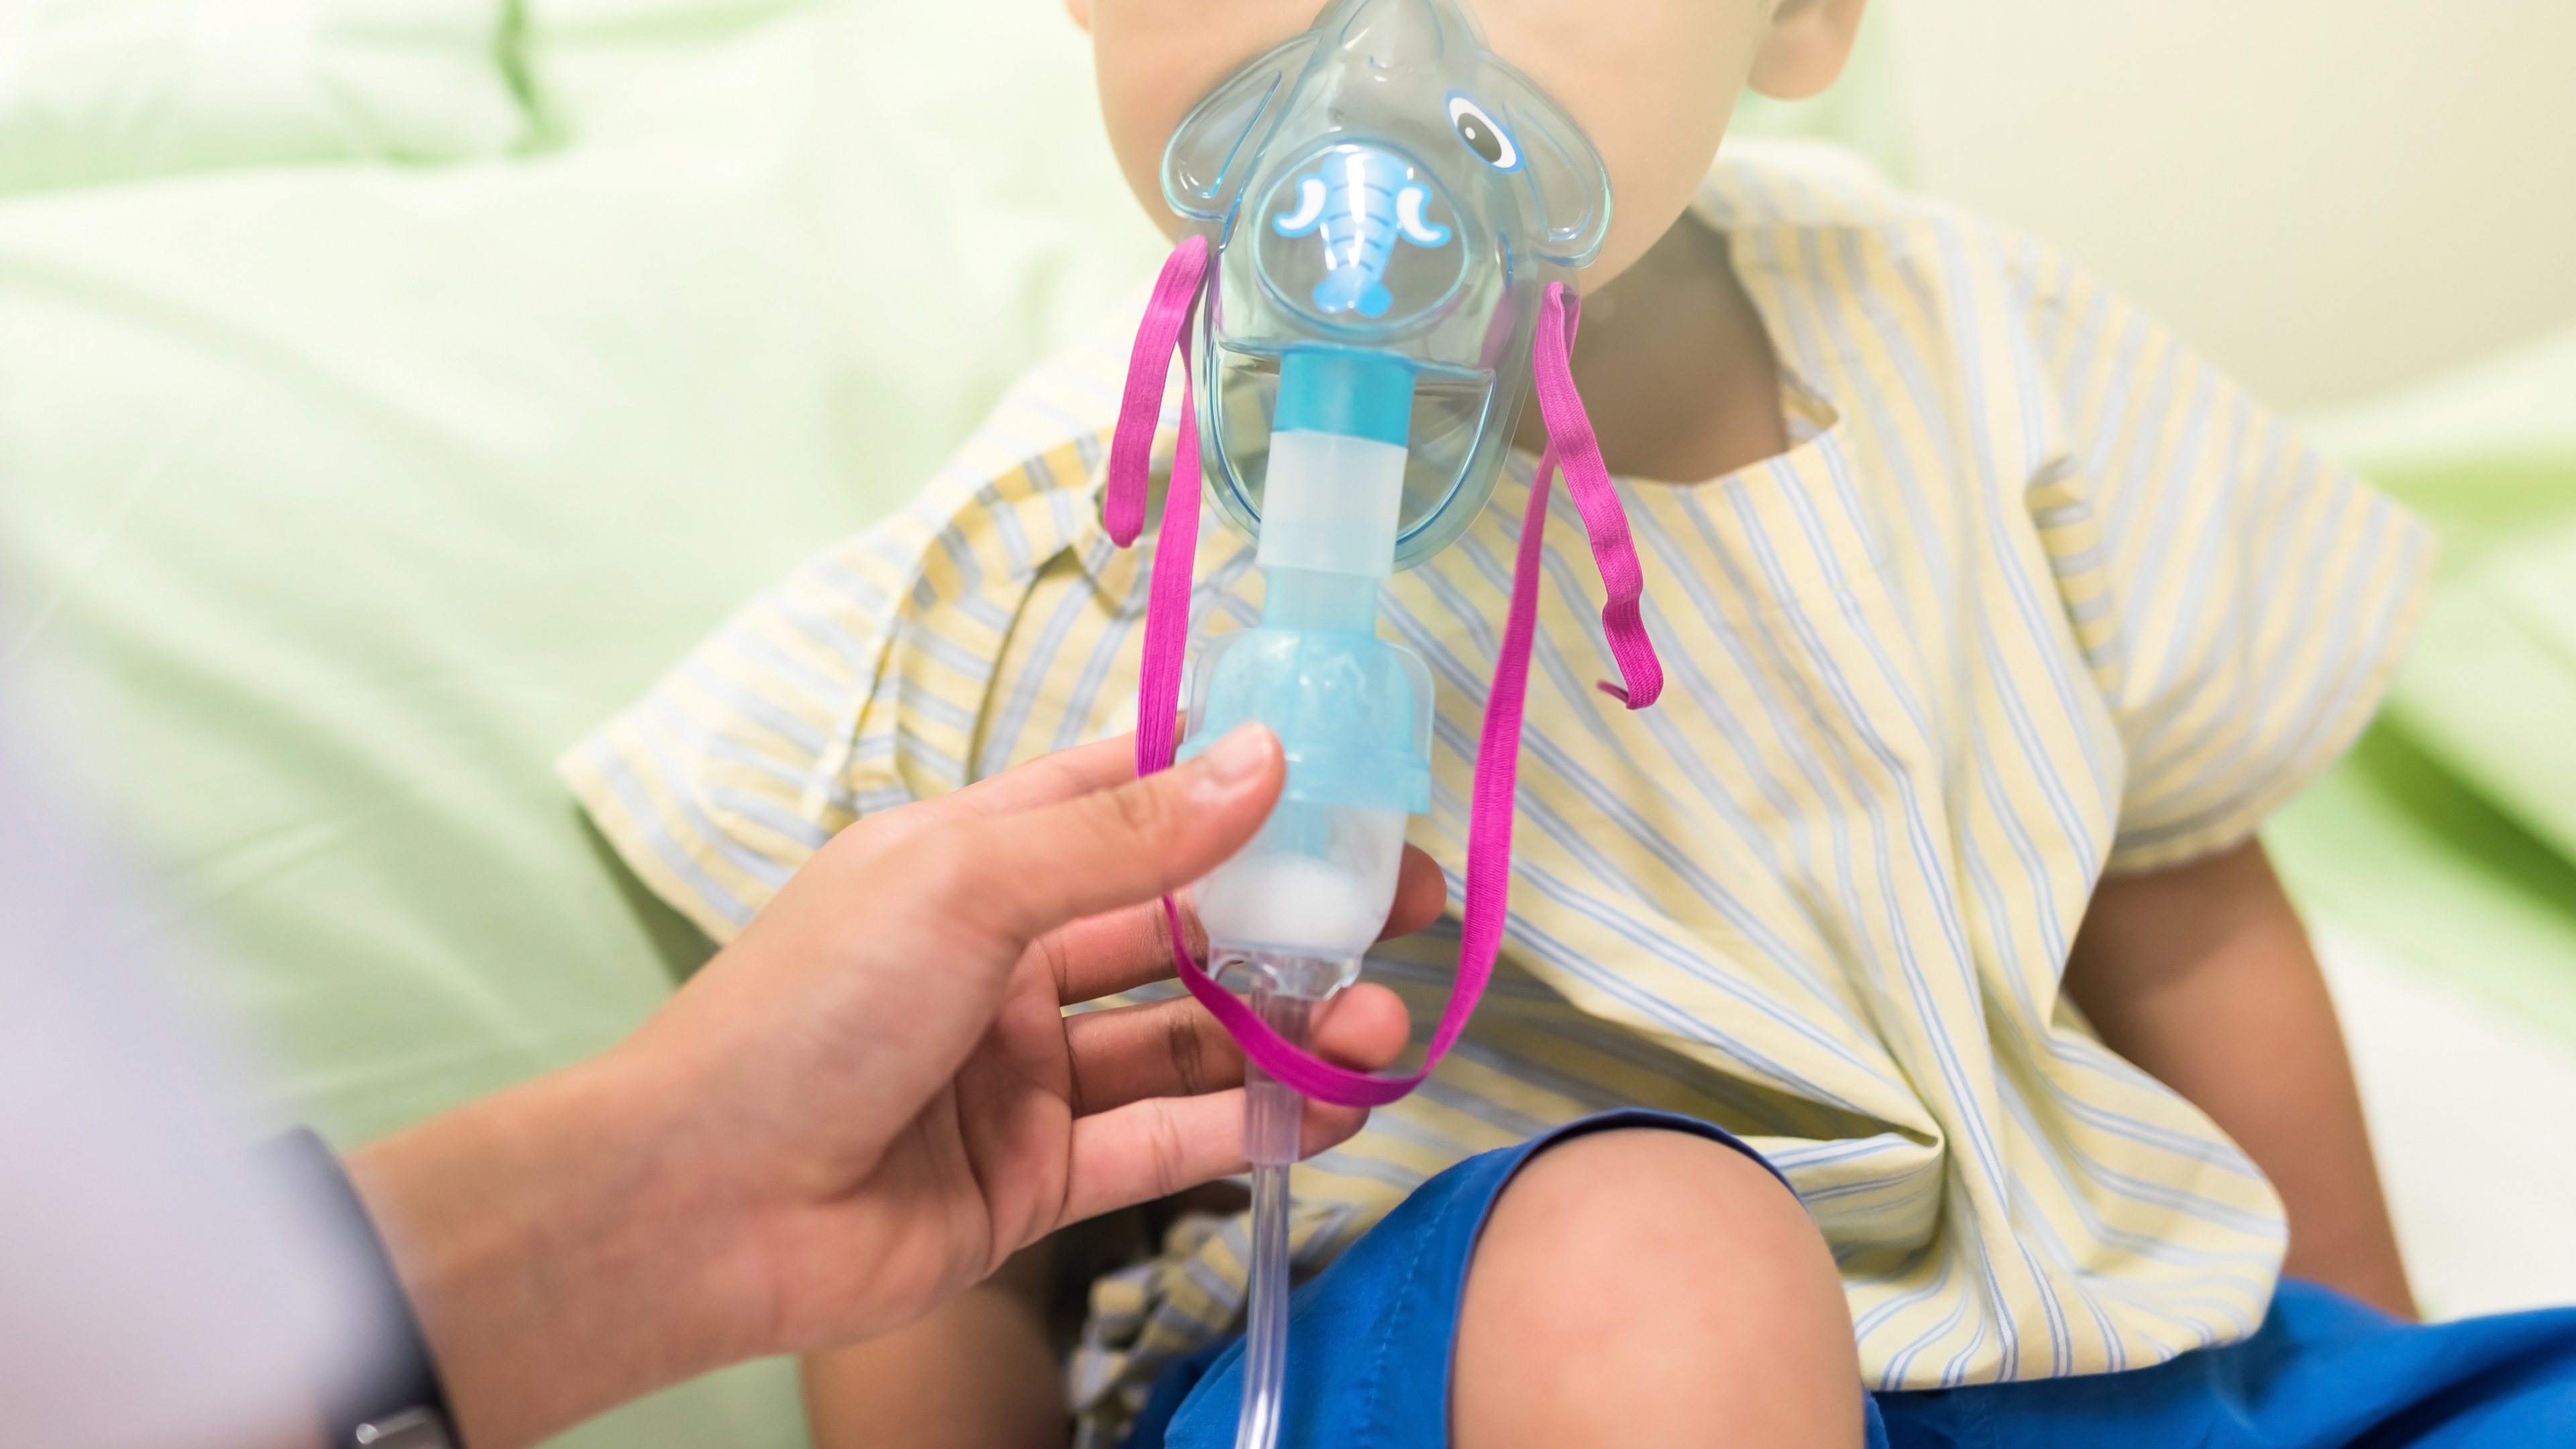 rsv has serious complications for pediatric patients